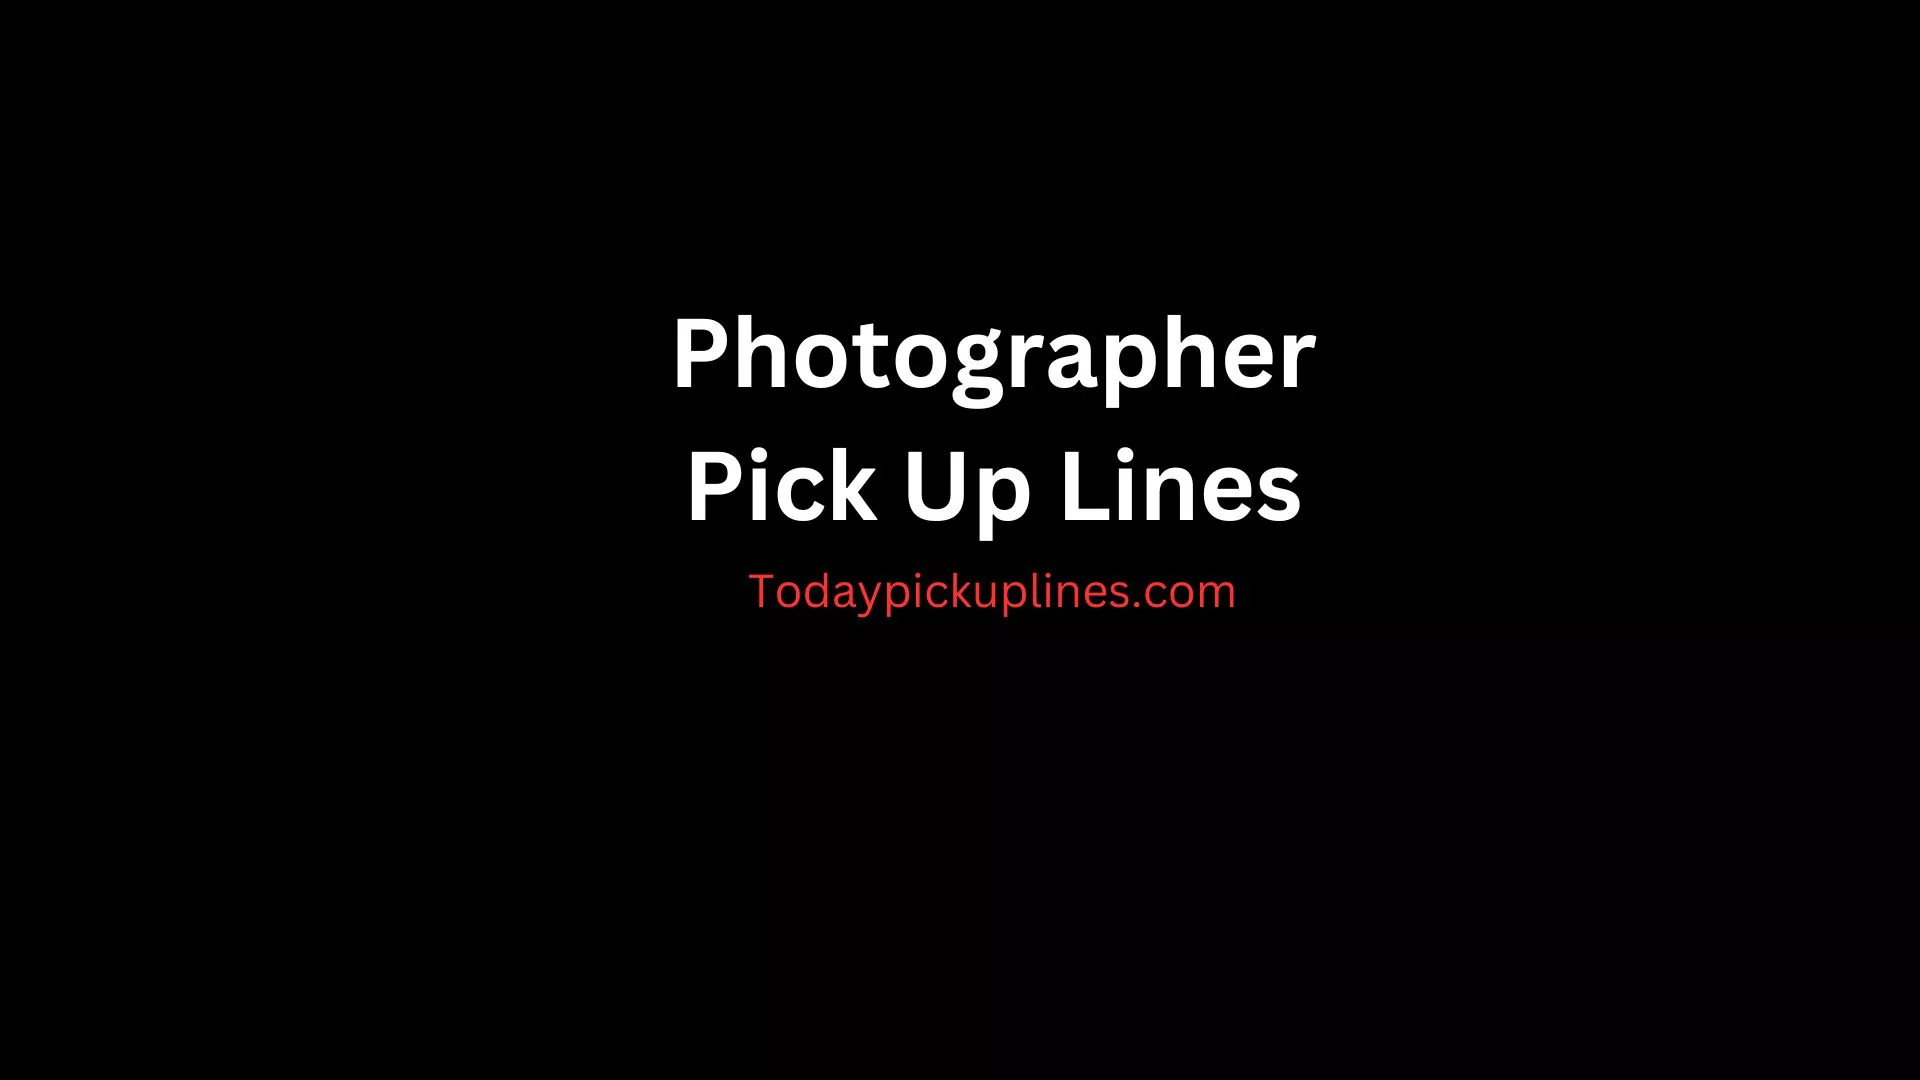 Photographer Pick Up Lines